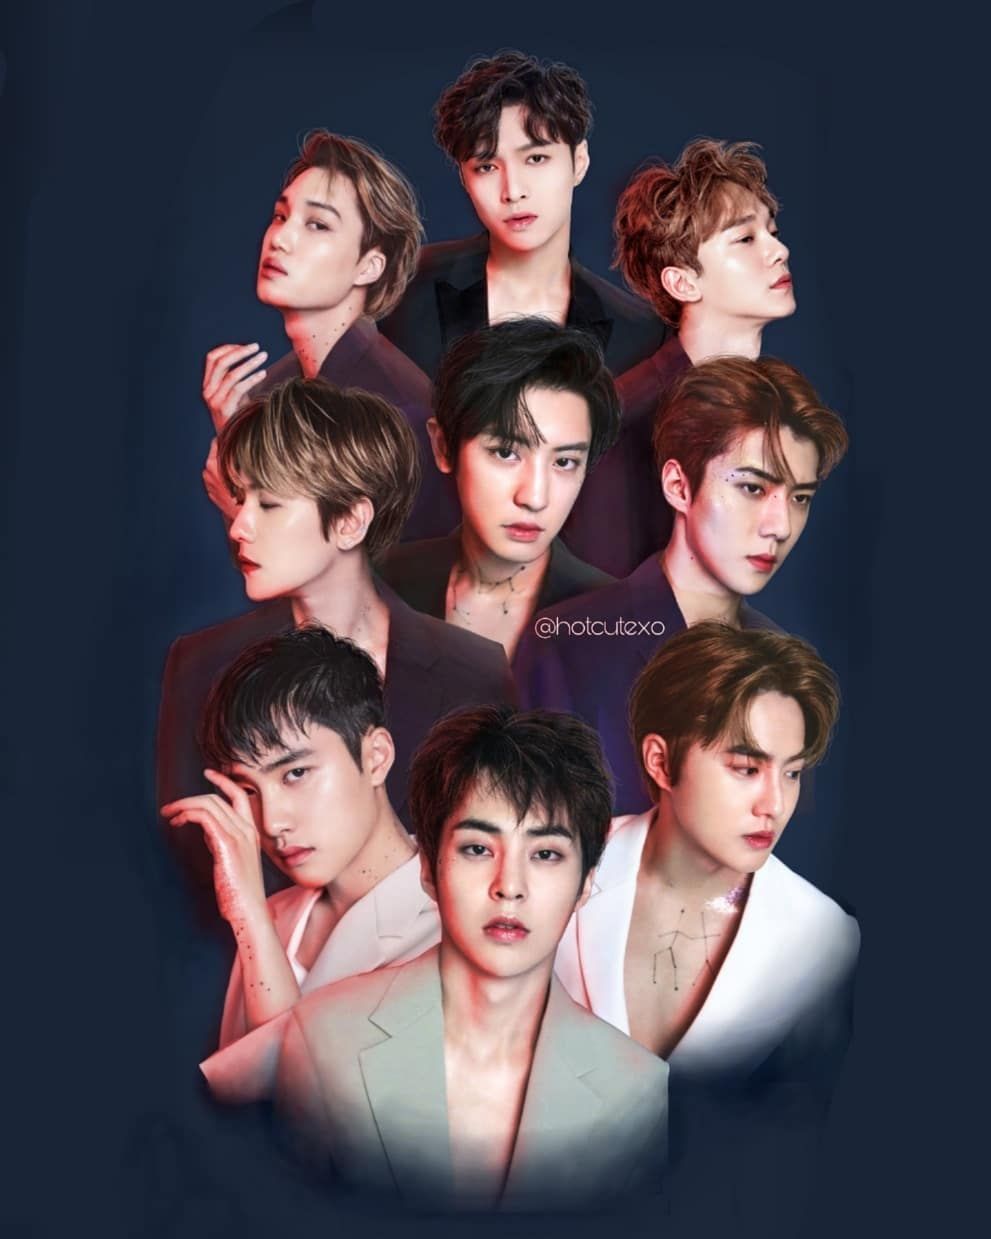 Exo Fanart Edit on Instagram: “An ot9 edit for you guys❤ If you would repost give me a credit please”. Gambar, Exo, Kolase foto